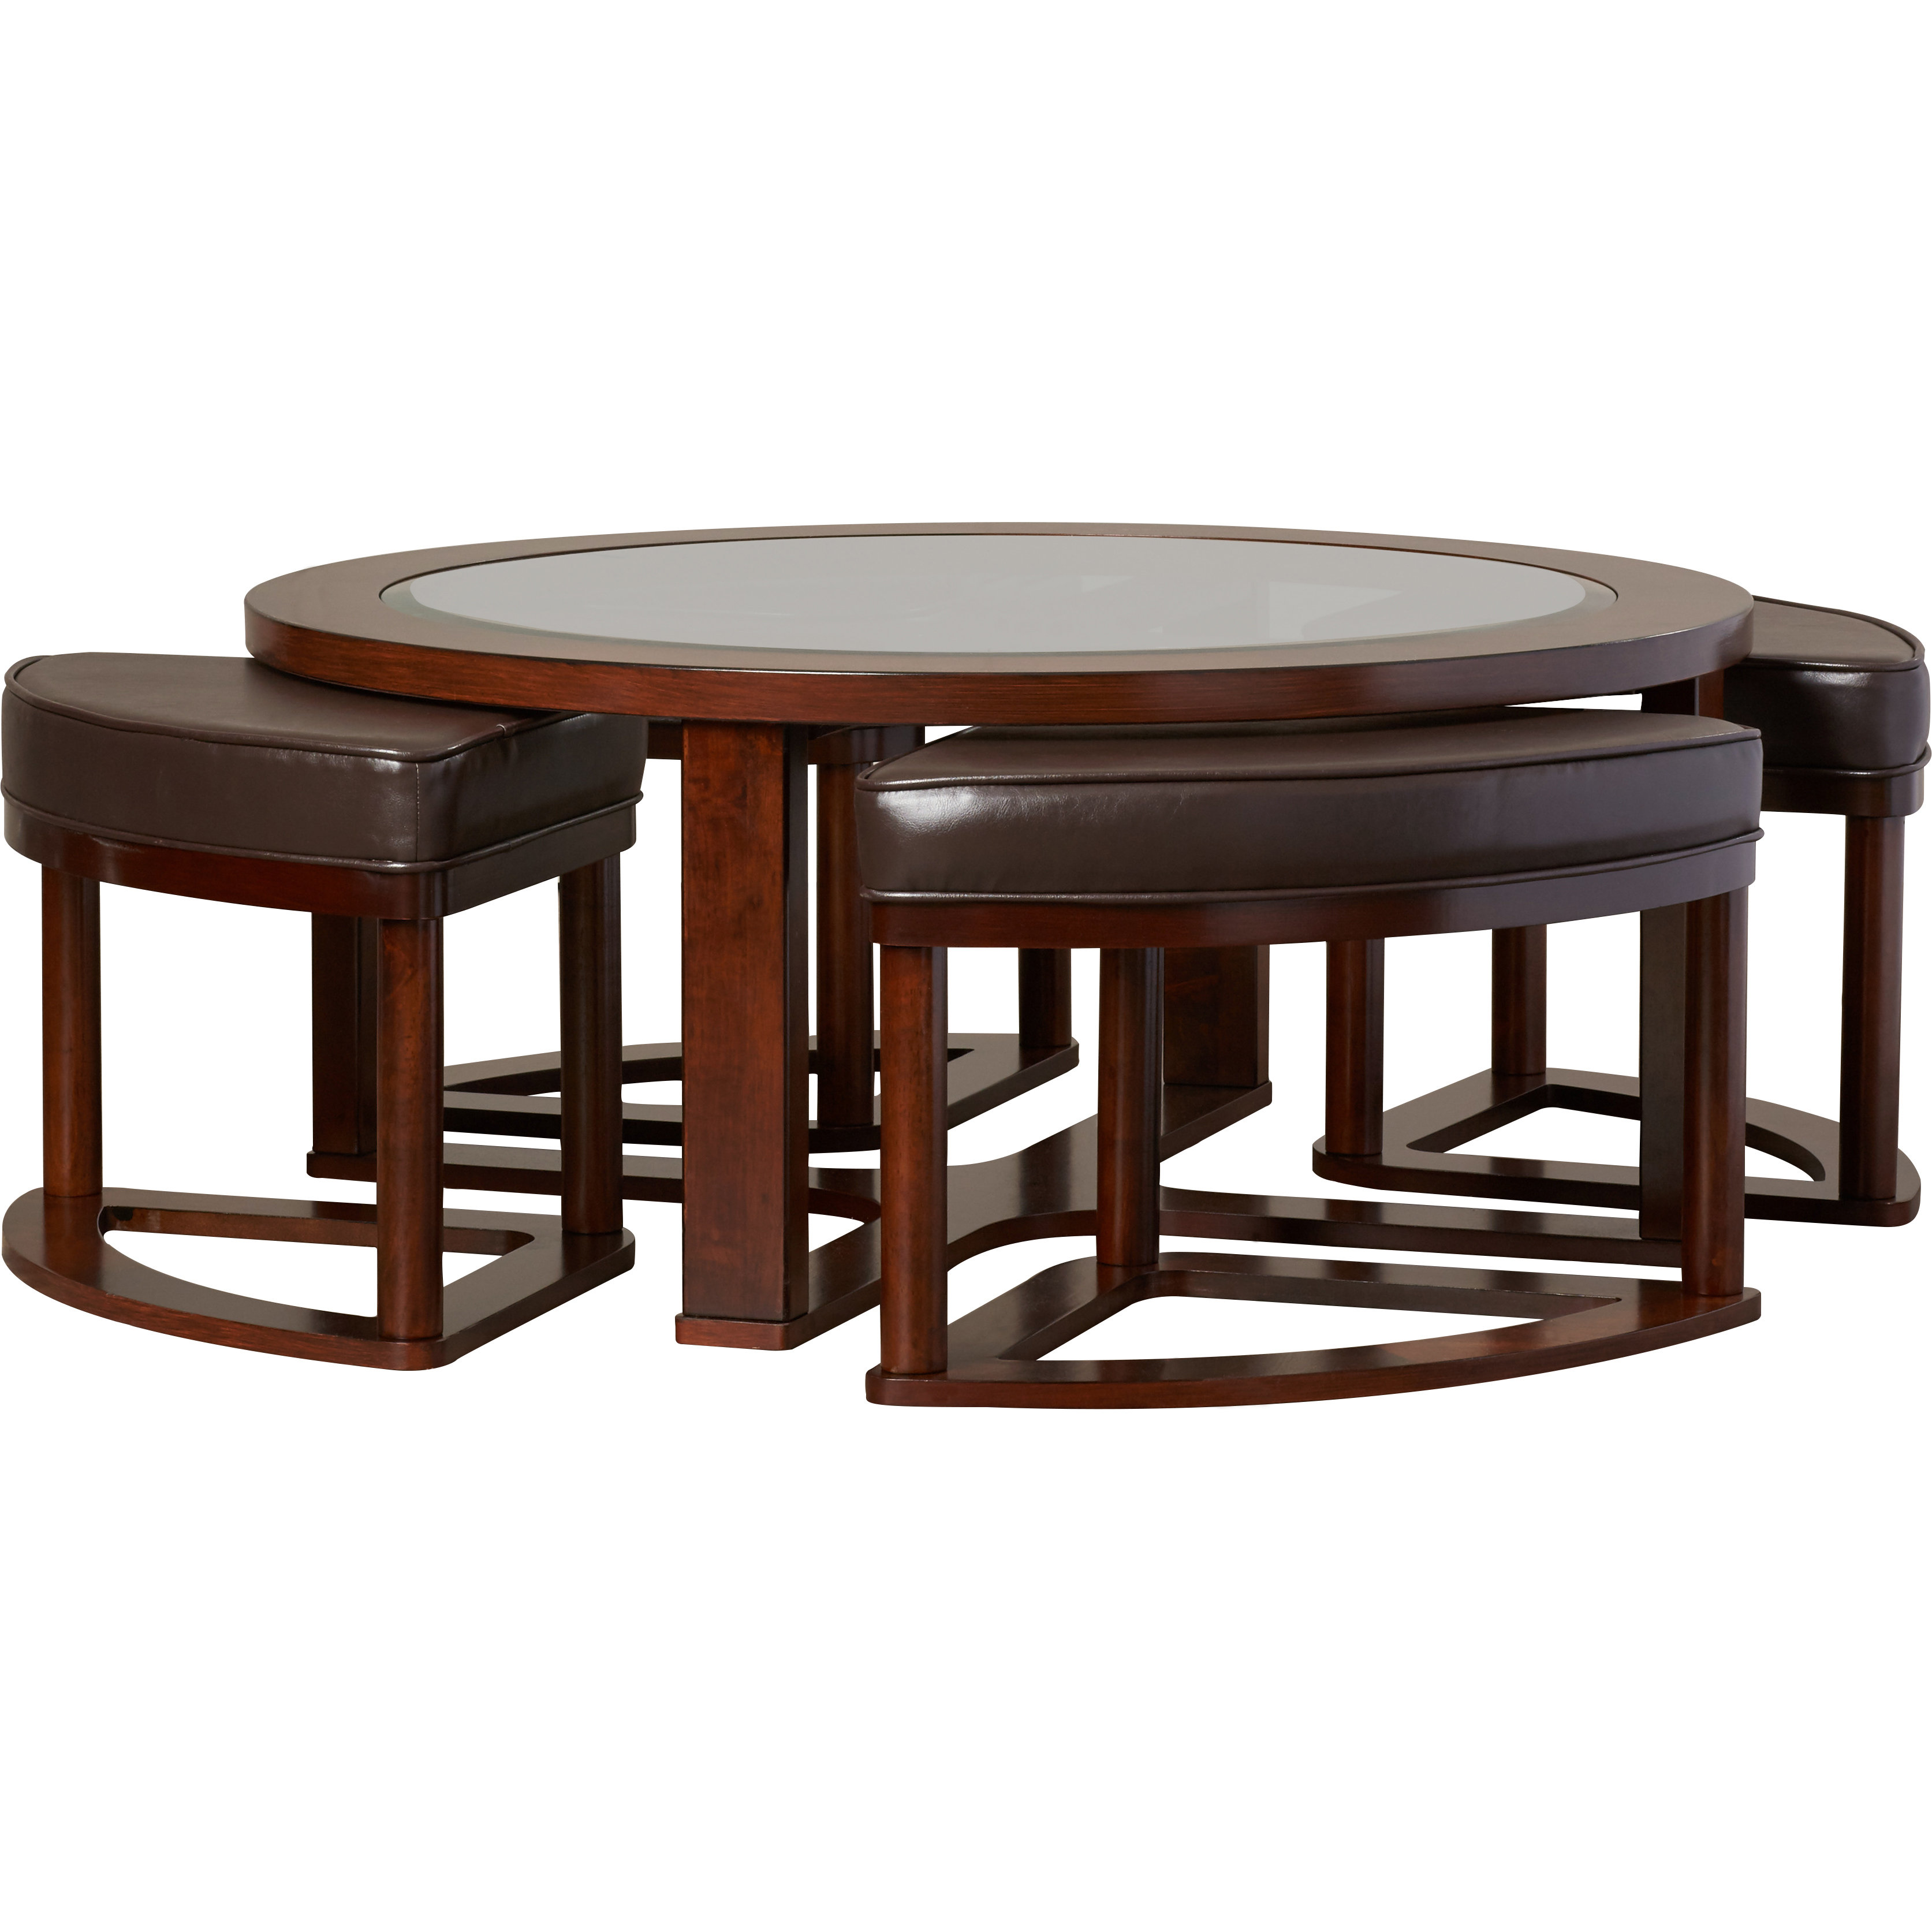 Darby Home Co Eastin 5 Piece Coffee Table and Stool Set